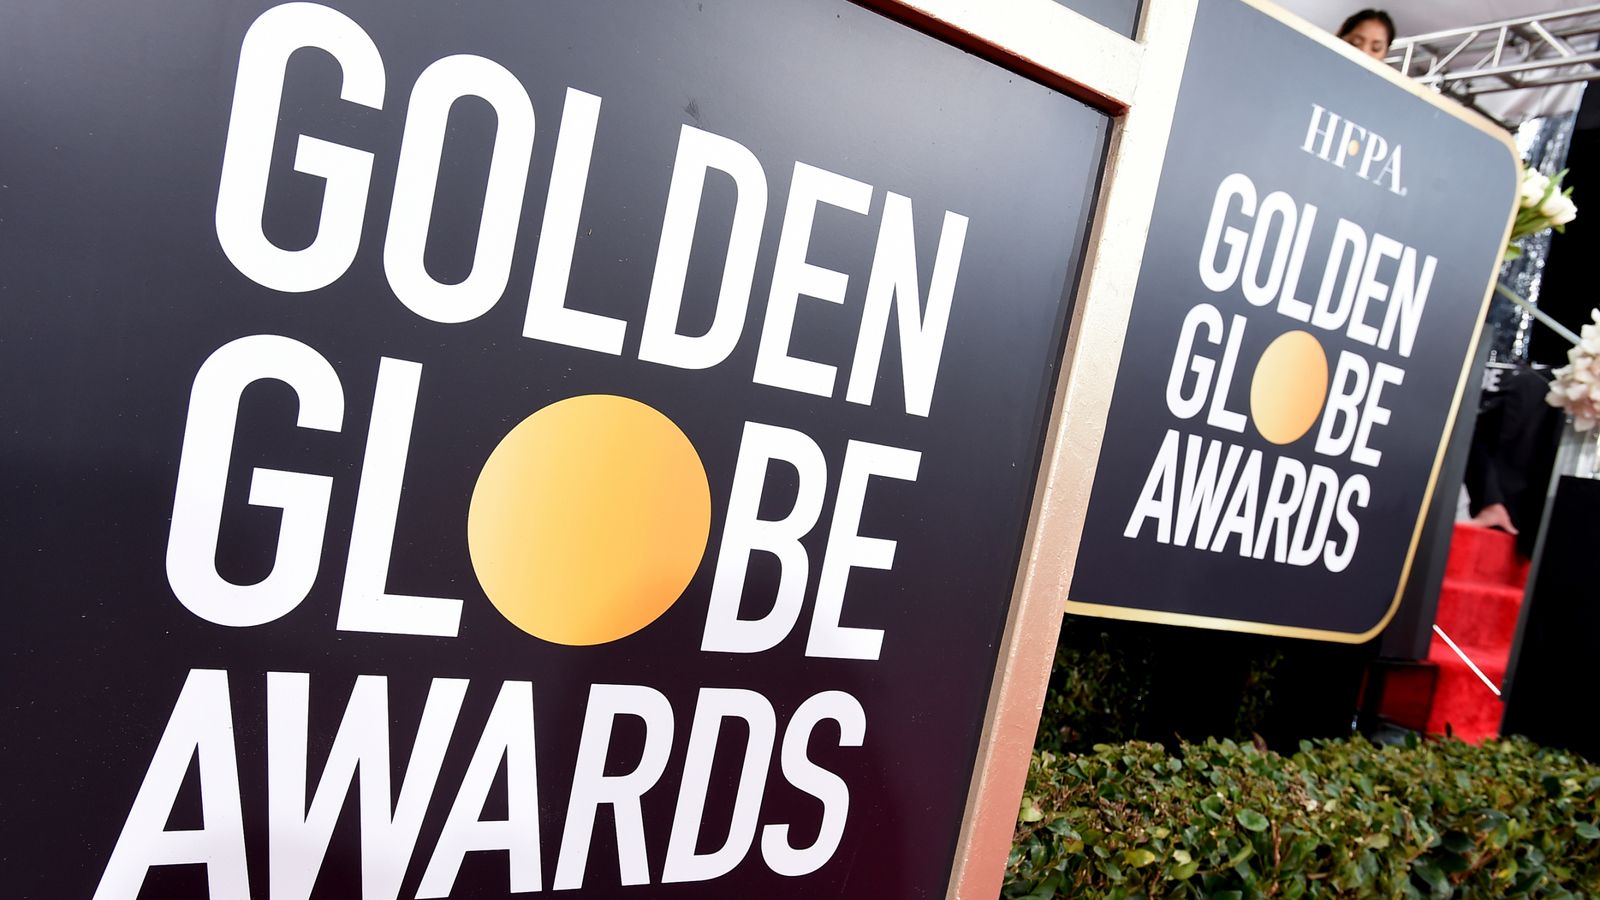 Golden Globes: NBC will not air 2022 awards as Tom Cruise returns his gongs